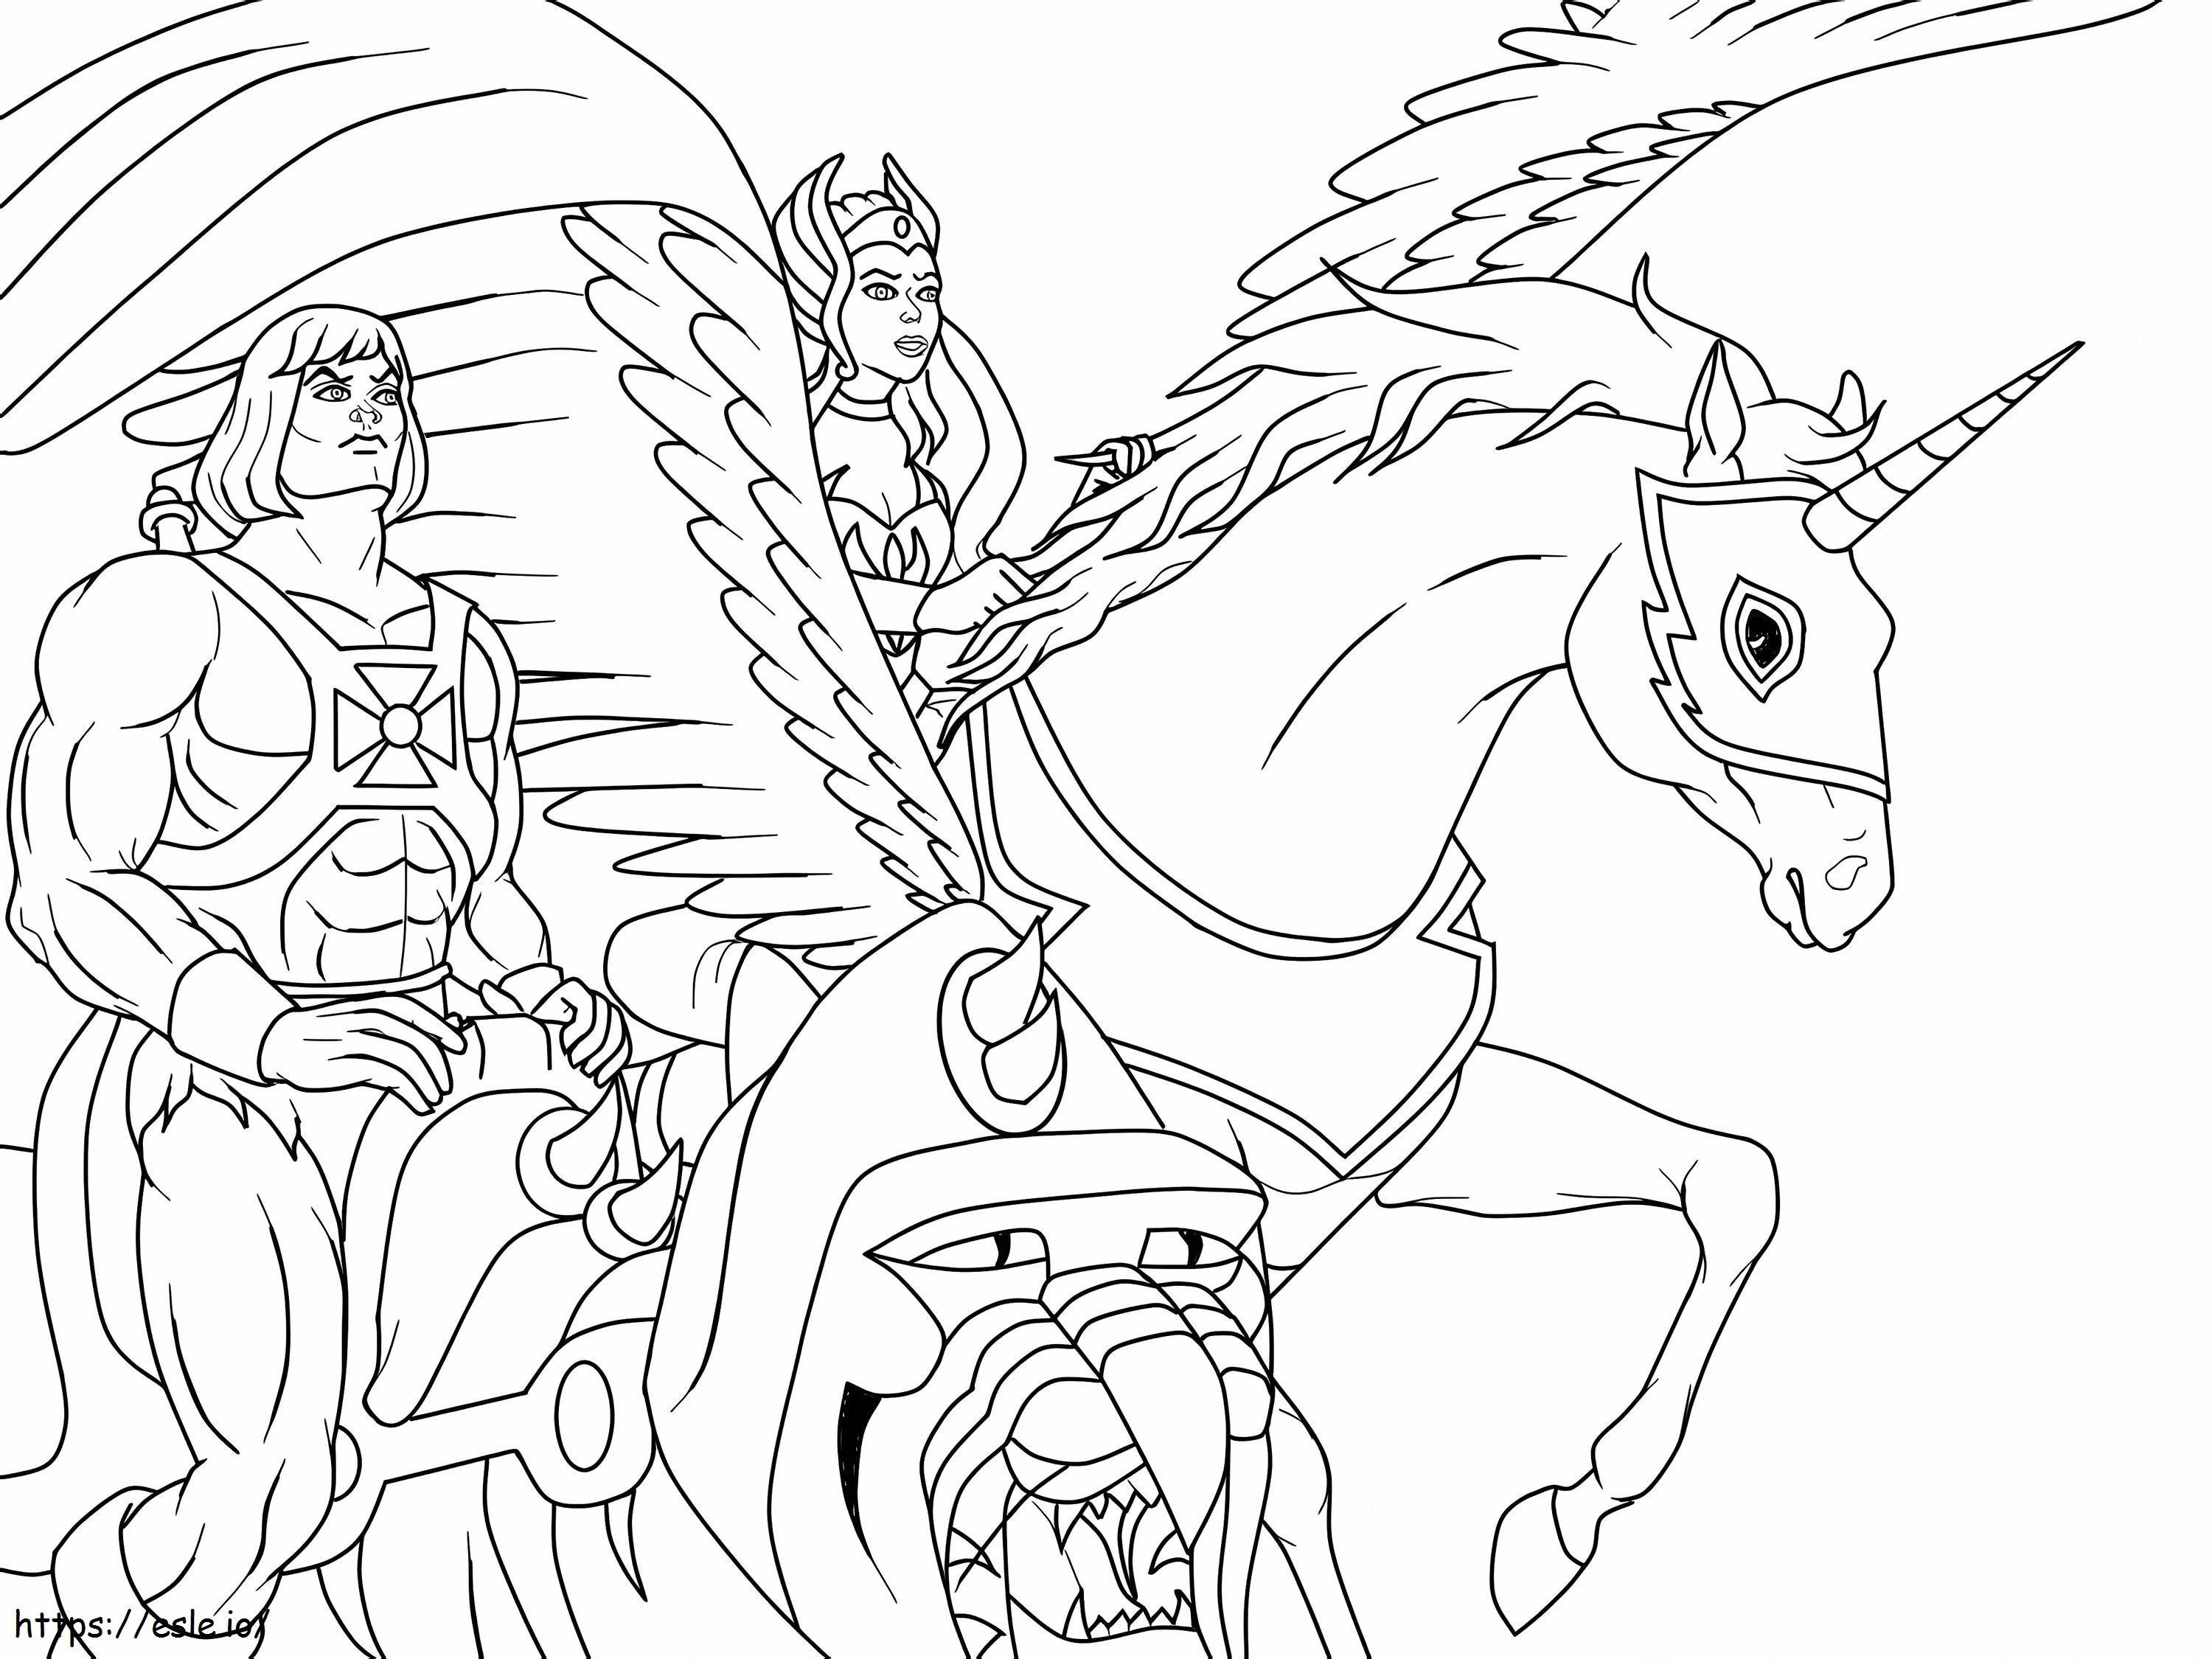 She Ra And He Man coloring page